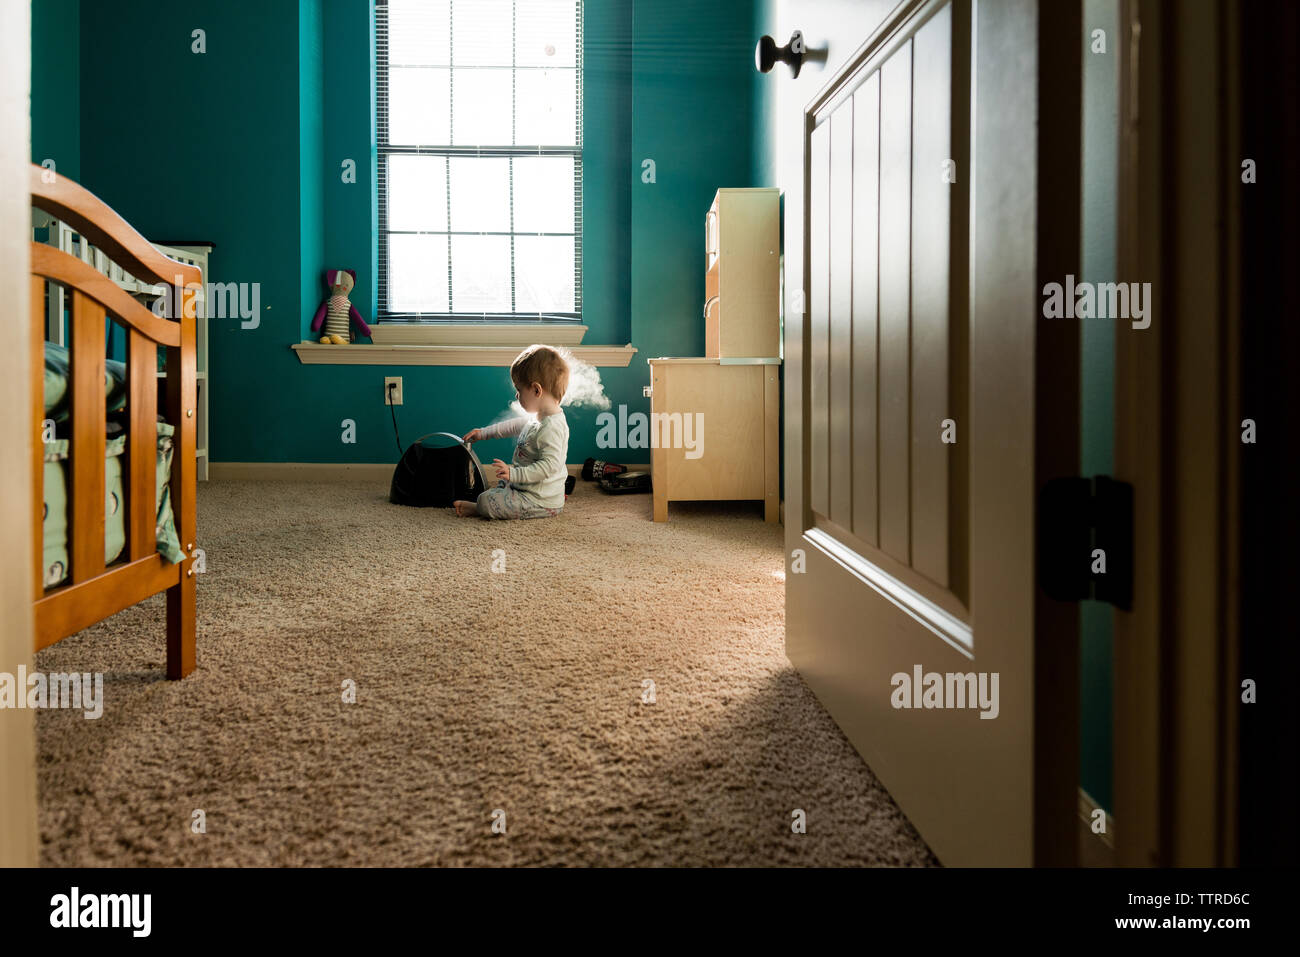 Boy playing with steam machine while sitting on rug at home seen through doorway Stock Photo